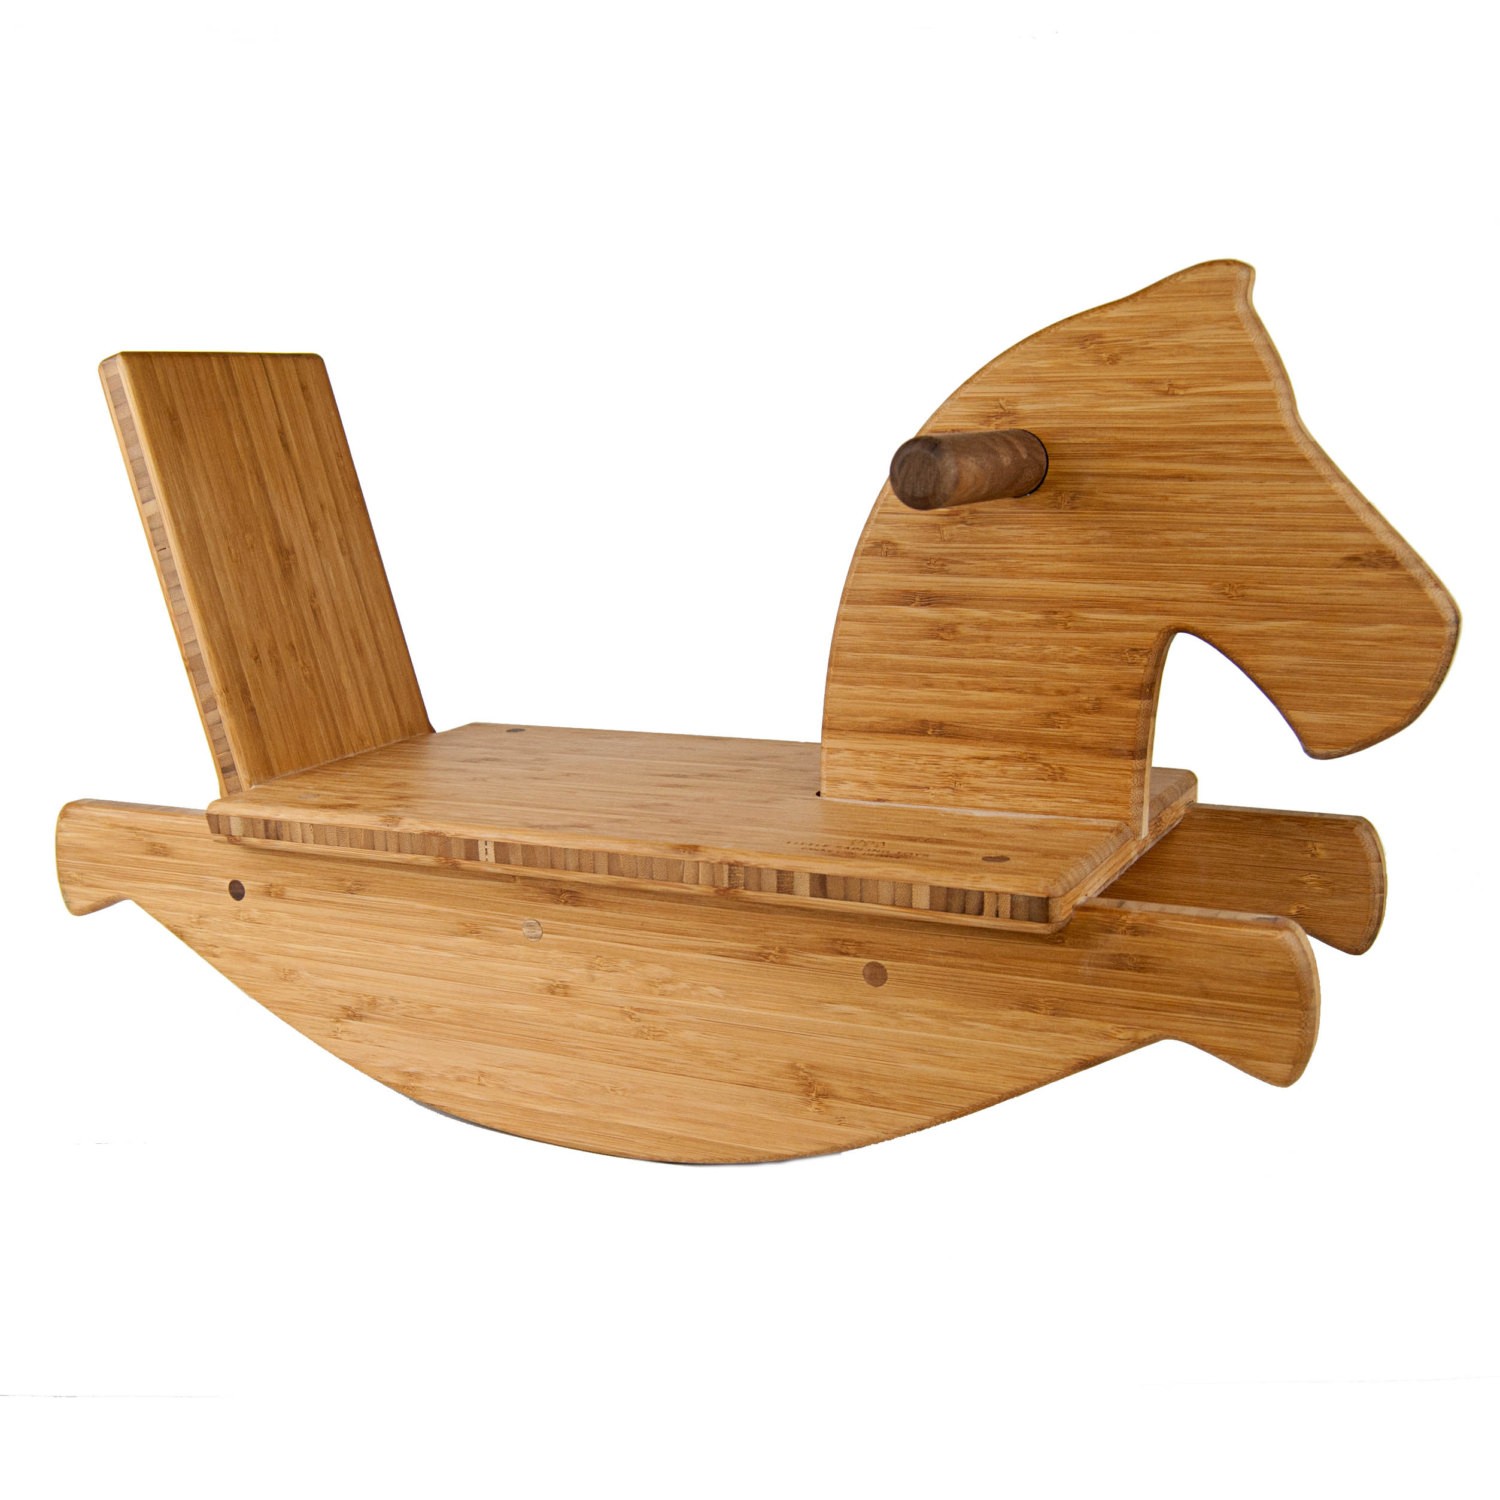 Bamboo wooden toy rocking horse personalized by